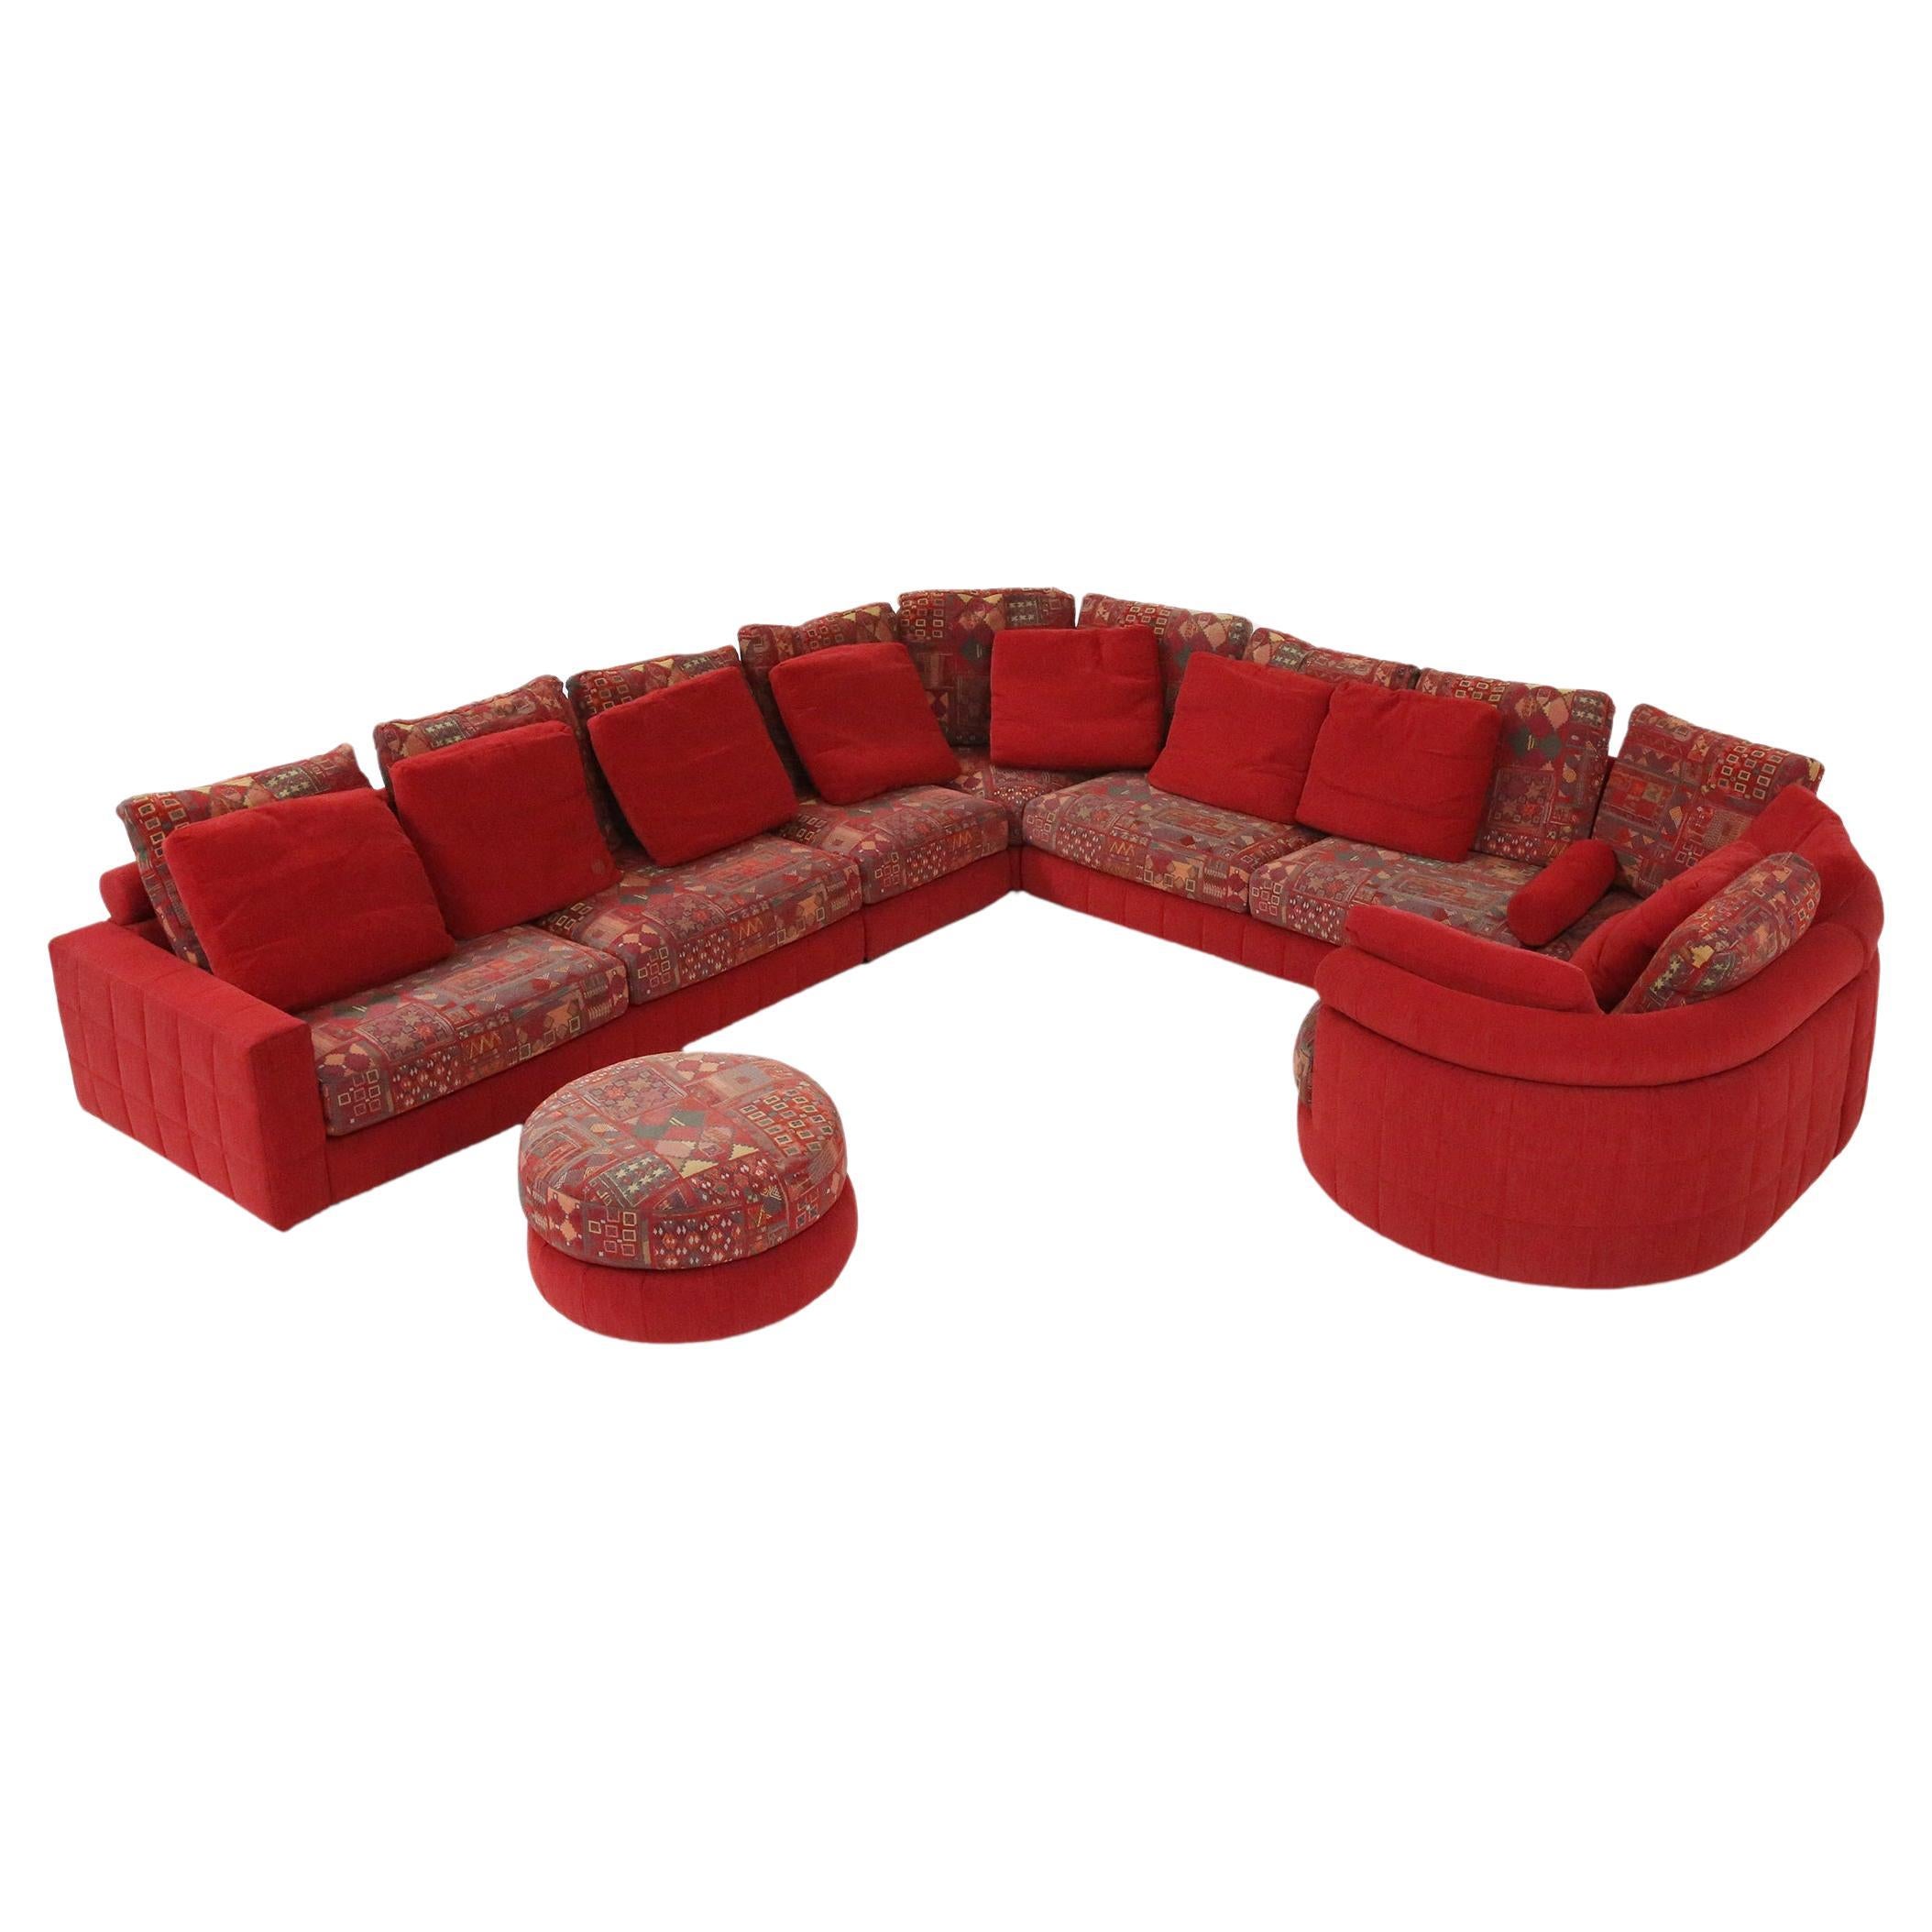 Roche Bobois modular sofa in red and patterned upholstery 1980 For Sale